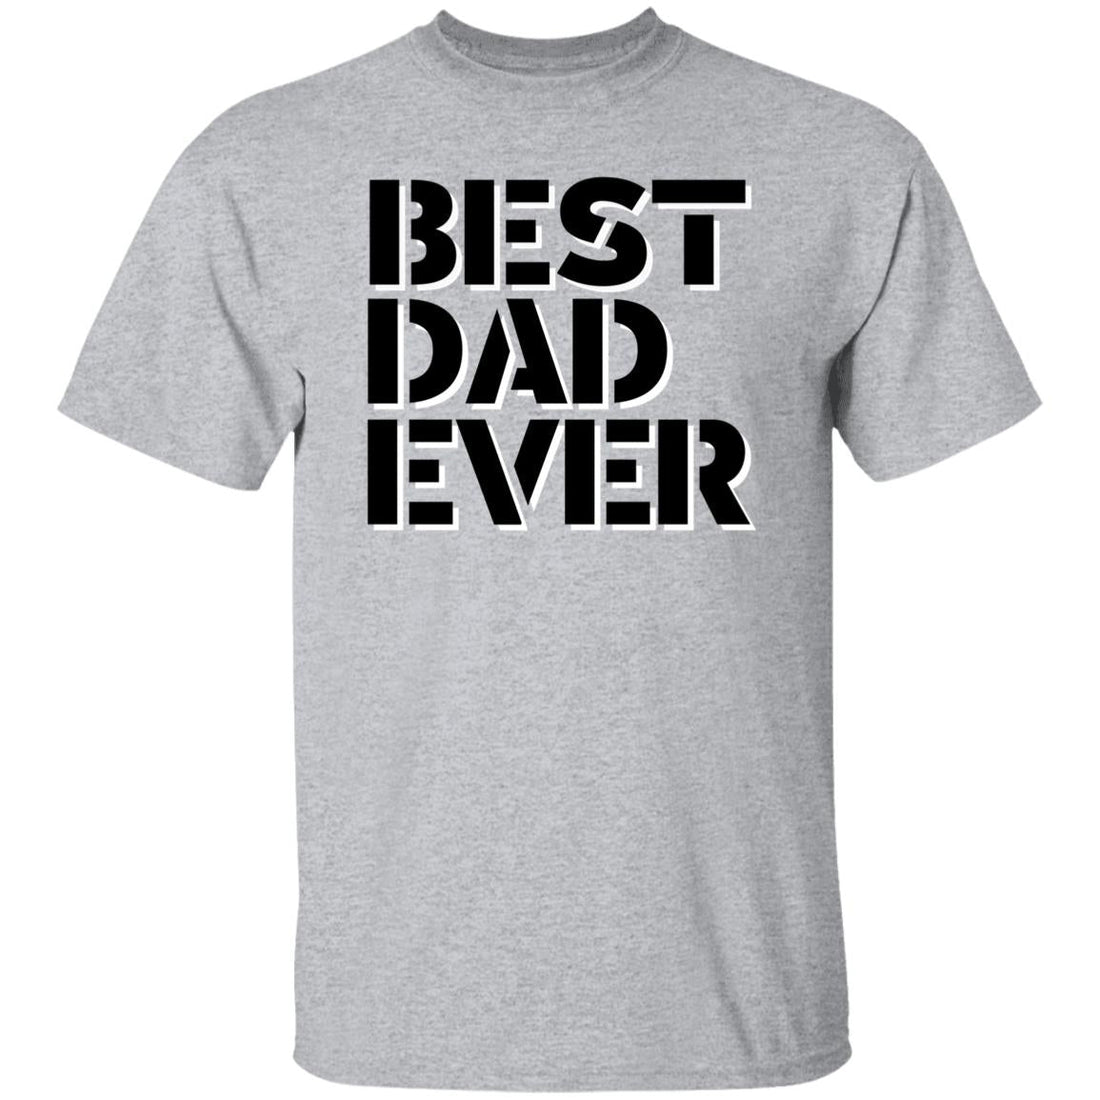 Best Dad Ever T-Shirt - T-Shirts - Positively Sassy - Best Dad Ever T-Shirt